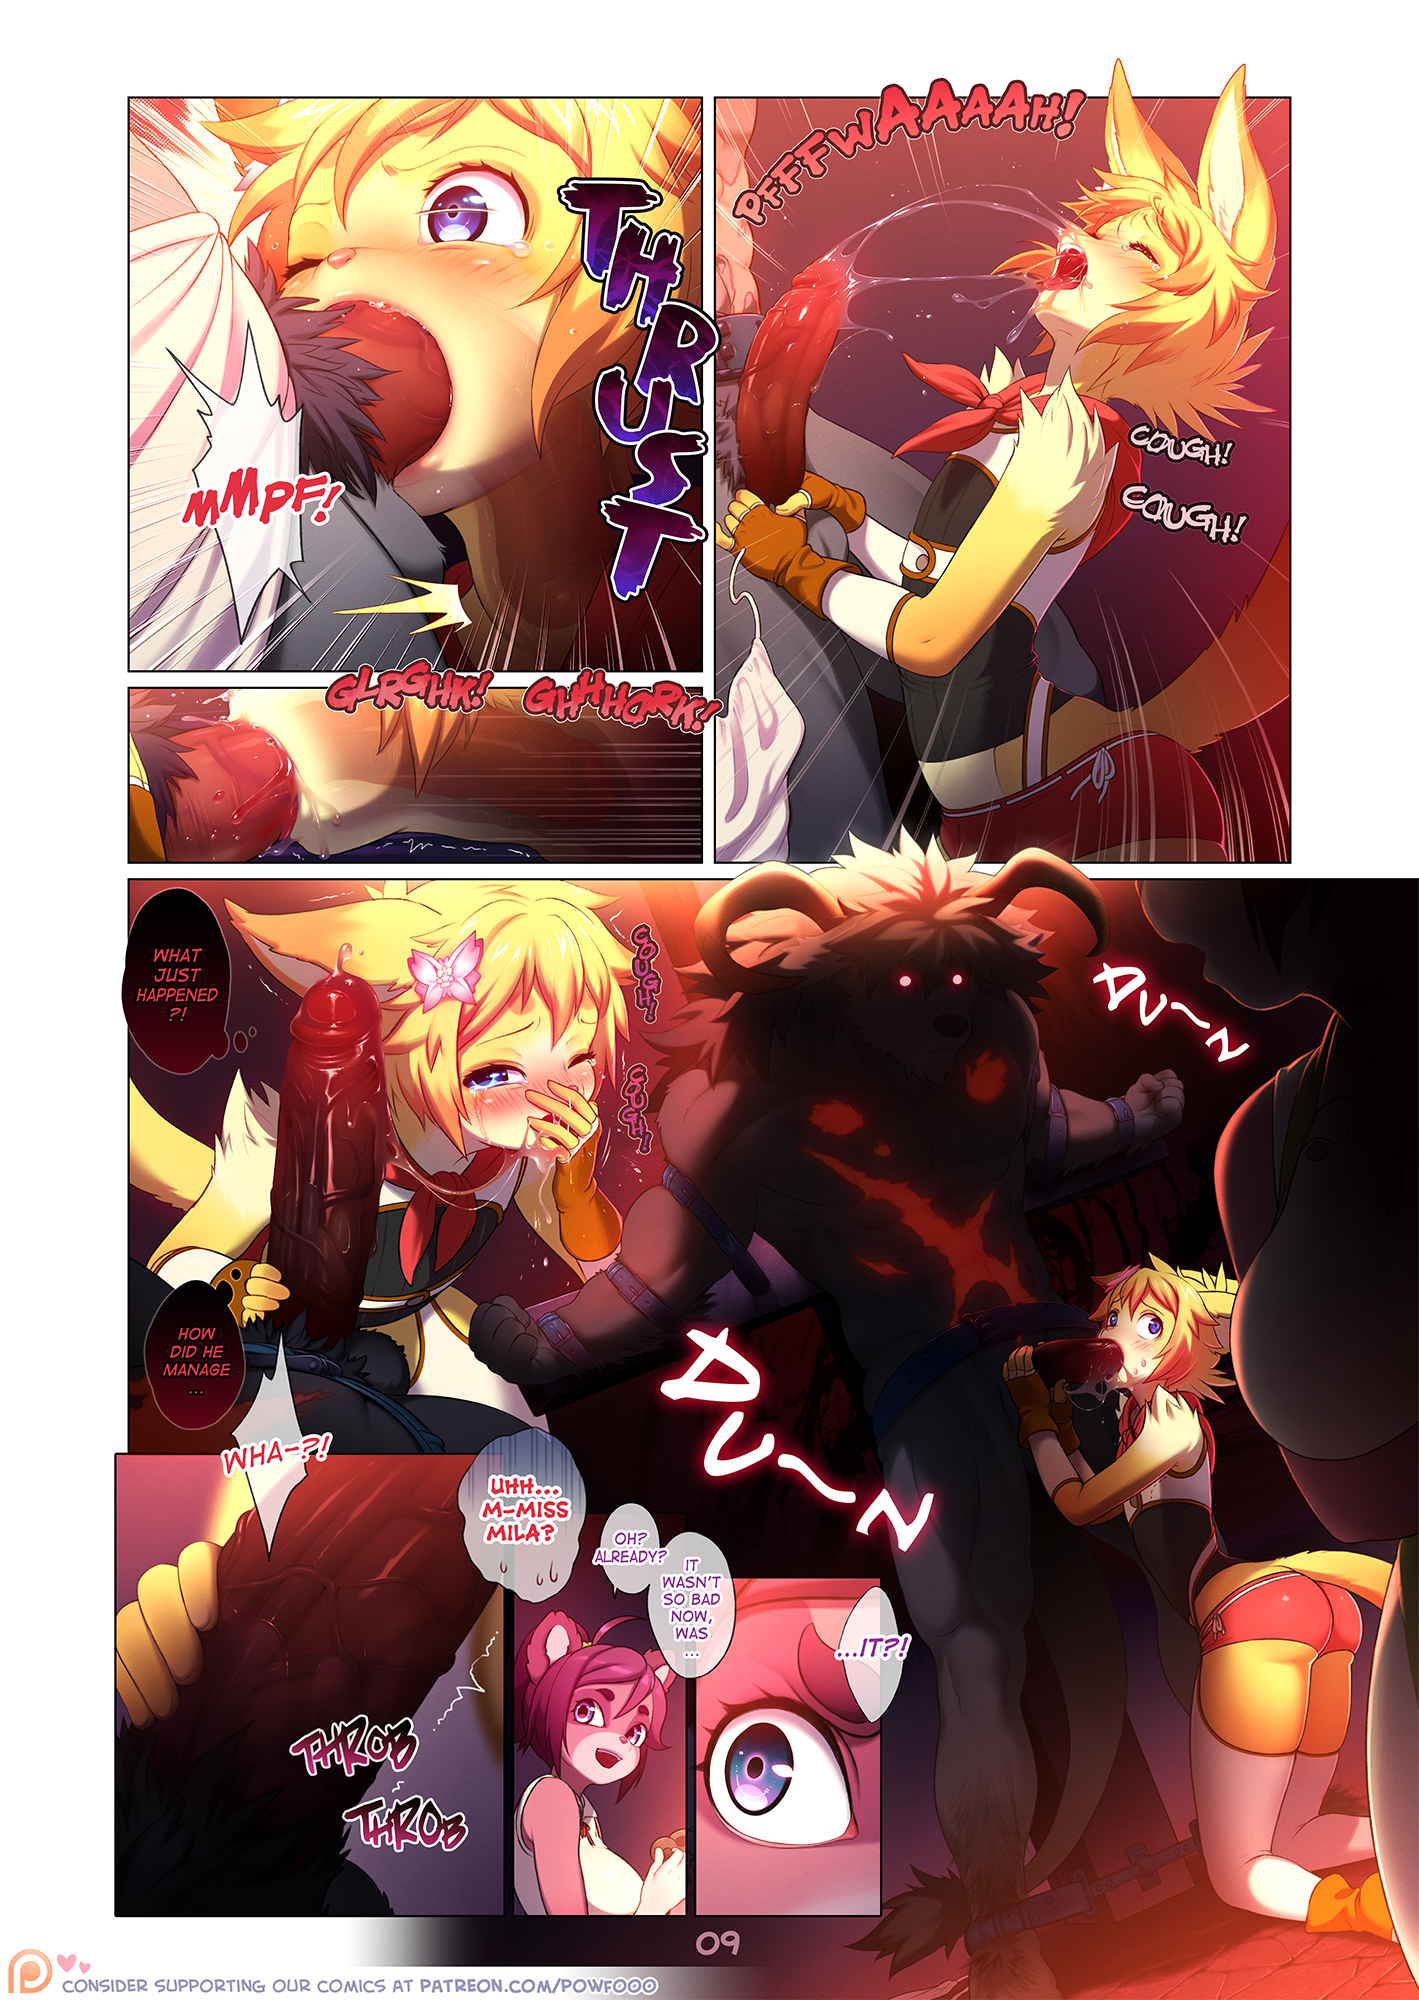 Arcana Tales Chapter 2: The Alchemist and The Beast porn comics Oral sex, Anal Sex, Furry, Gay, Group Sex, Stockings, Straight